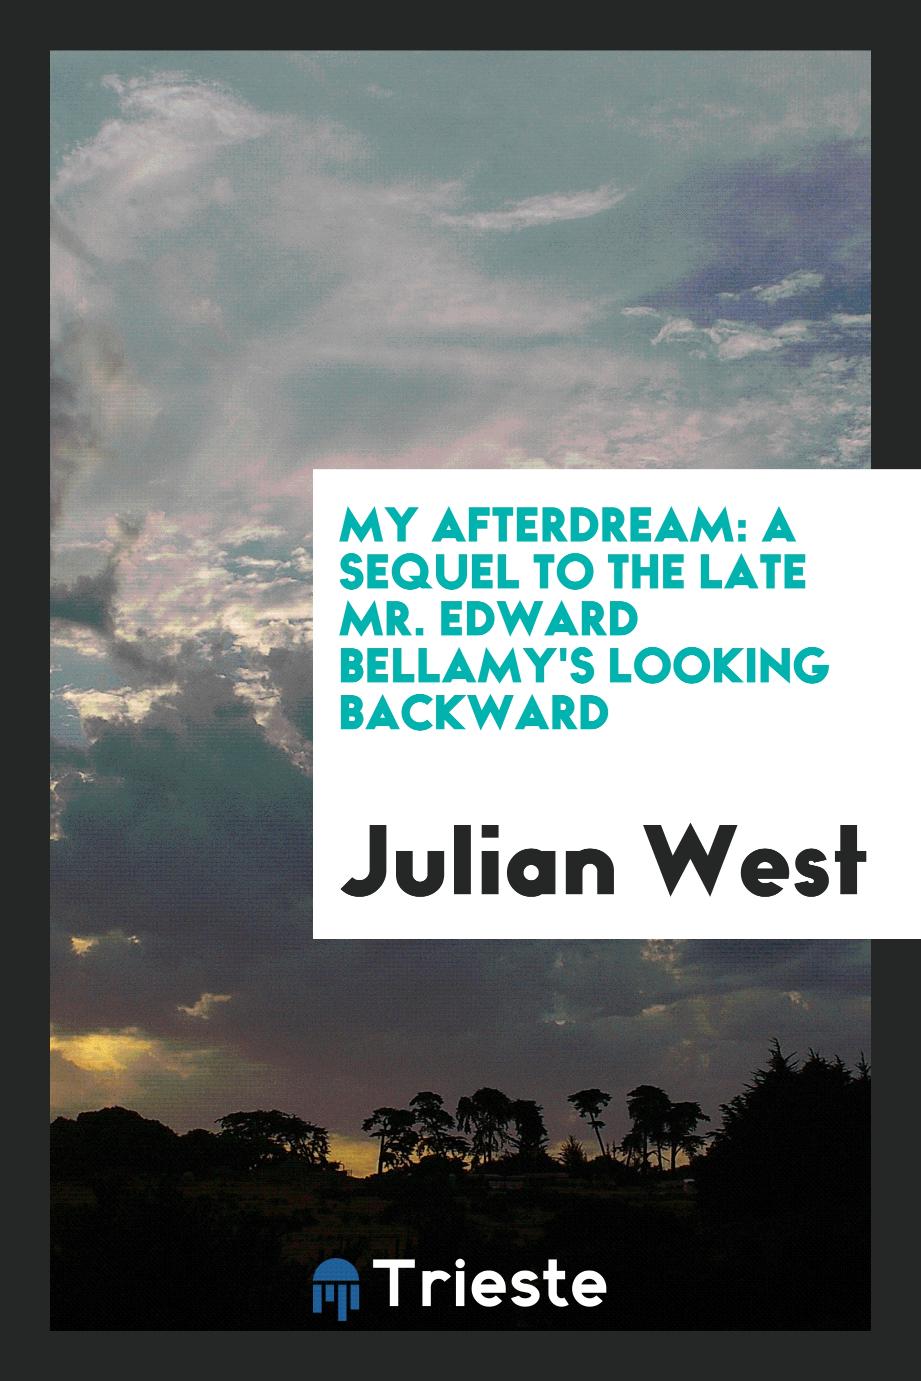 My afterdream: a sequel to the late Mr. Edward Bellamy's Looking backward